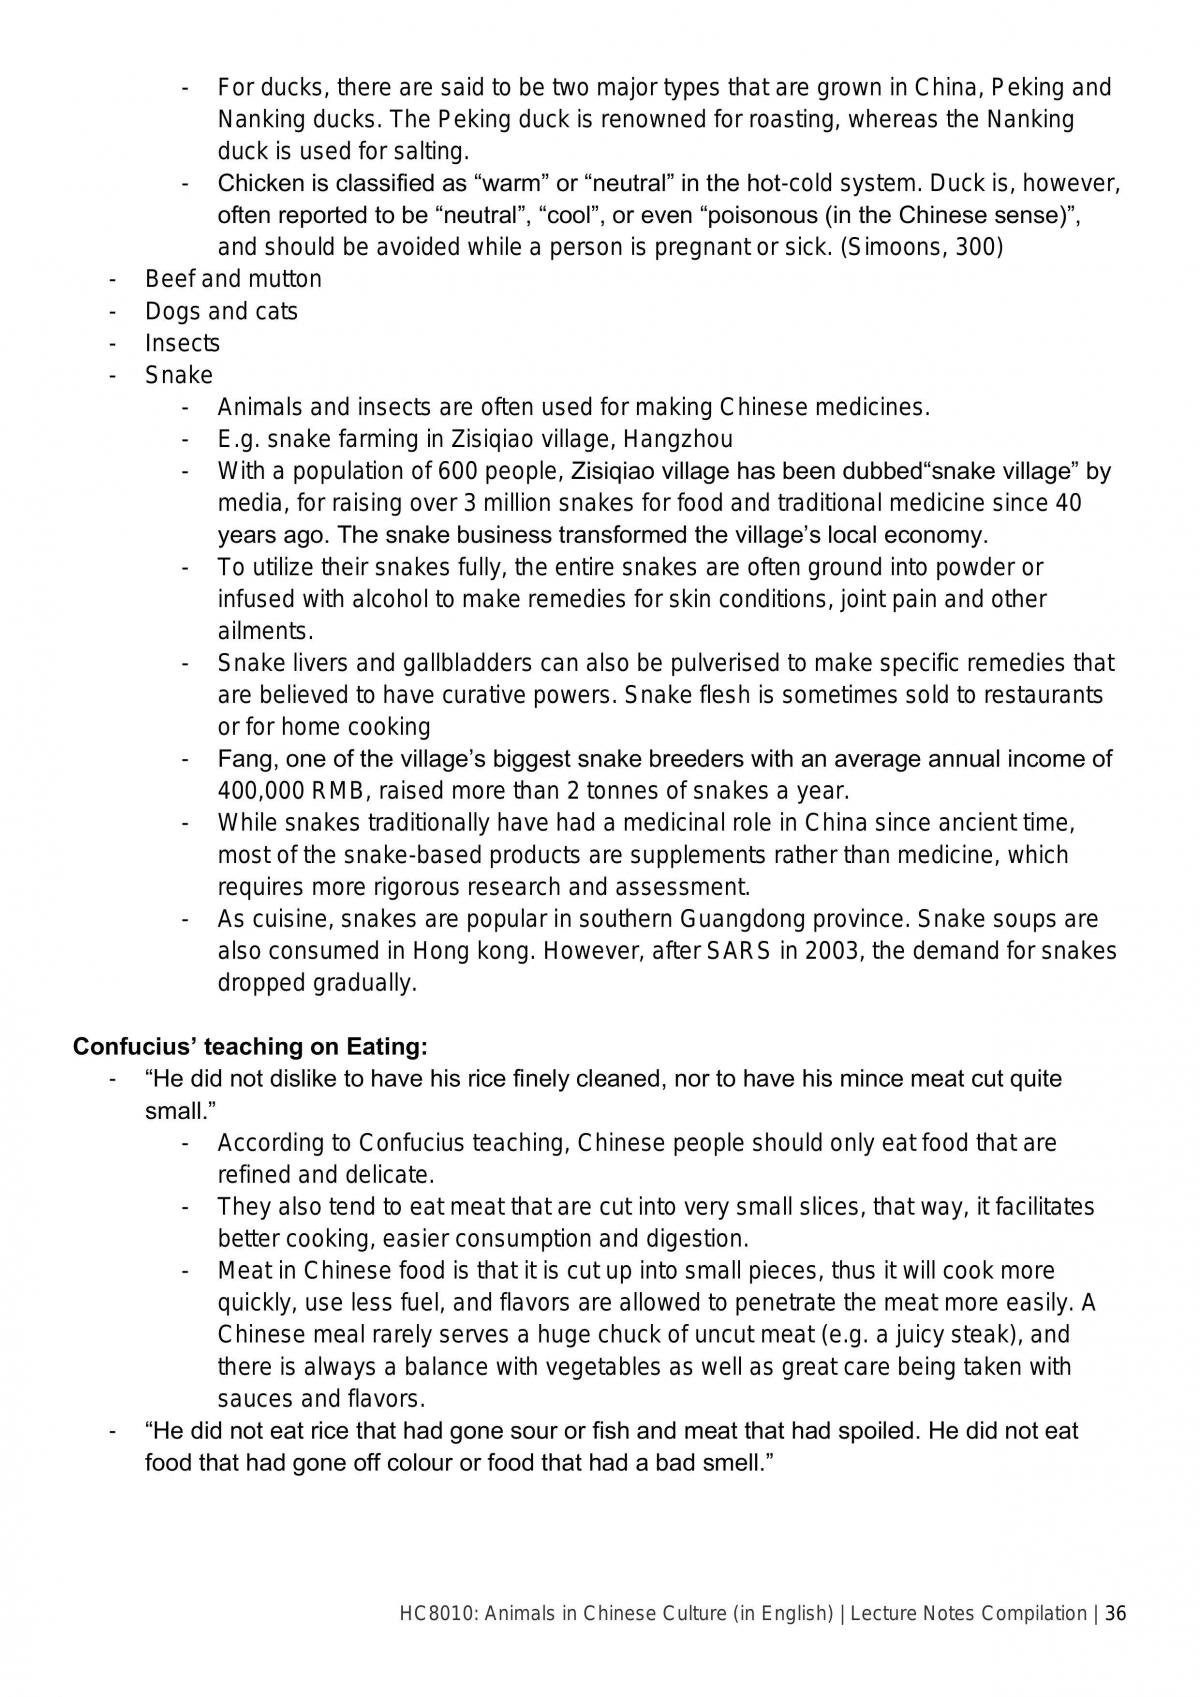 HC8010: Animals in Chinese Culture (in English) - Lecture Notes Compilation  - Page 36